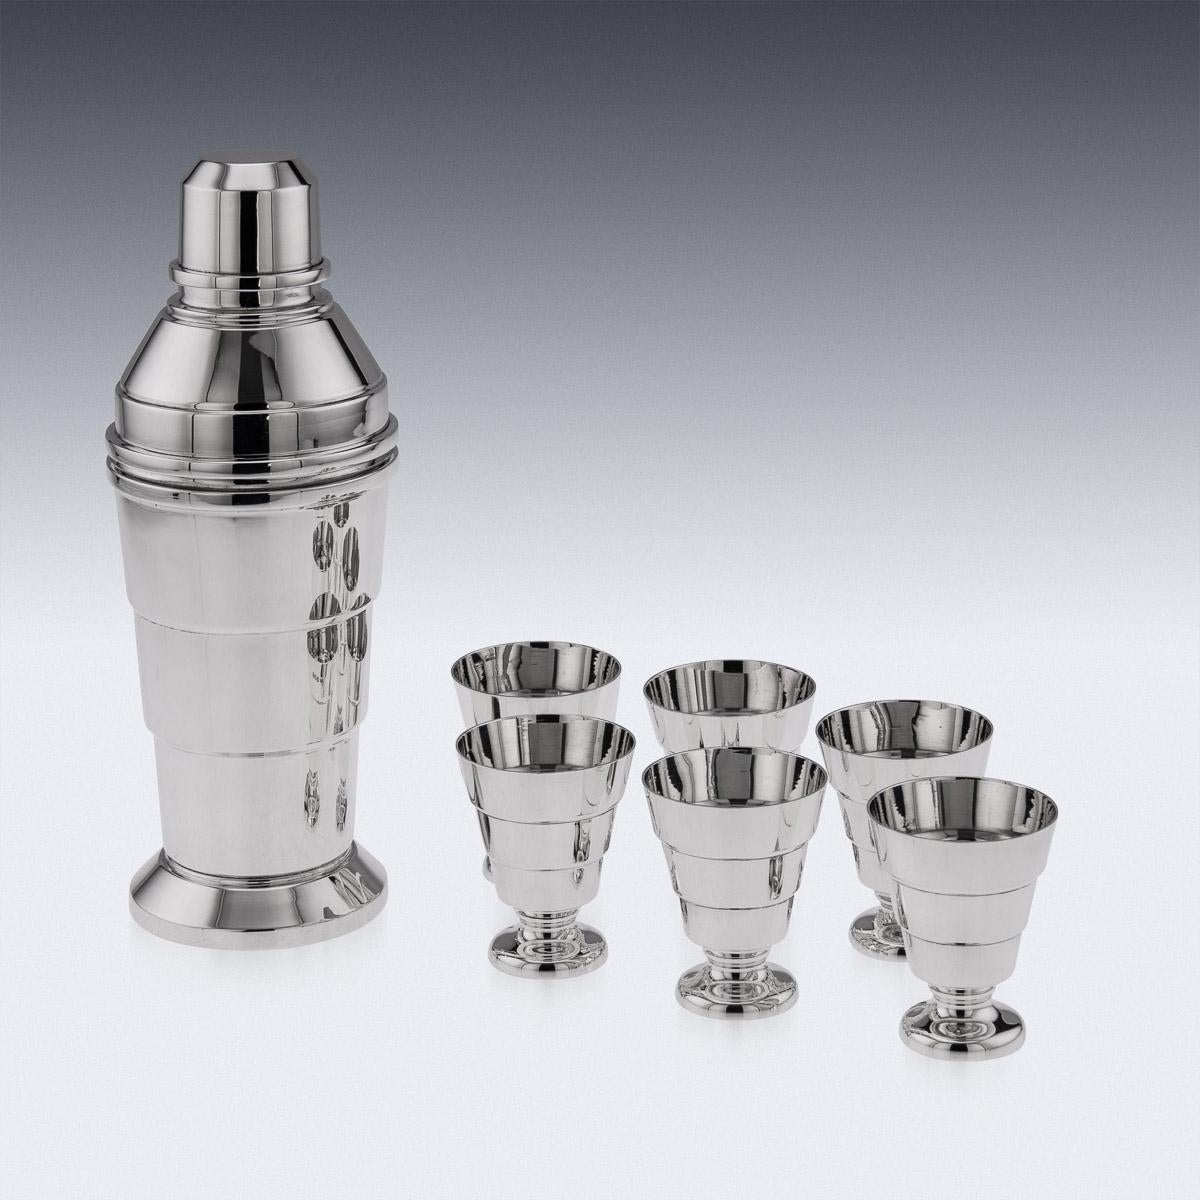 20th Century English Art Deco solid silver cocktail shaker and 6 beakers.
Hallmarked English silver (925 standard), Birmingham, year 1935 (L), Maker A.L.D (A. L. Davenport Ltd).

Condition
In great condition - no damage.

SIZE
SHAKER
Height: